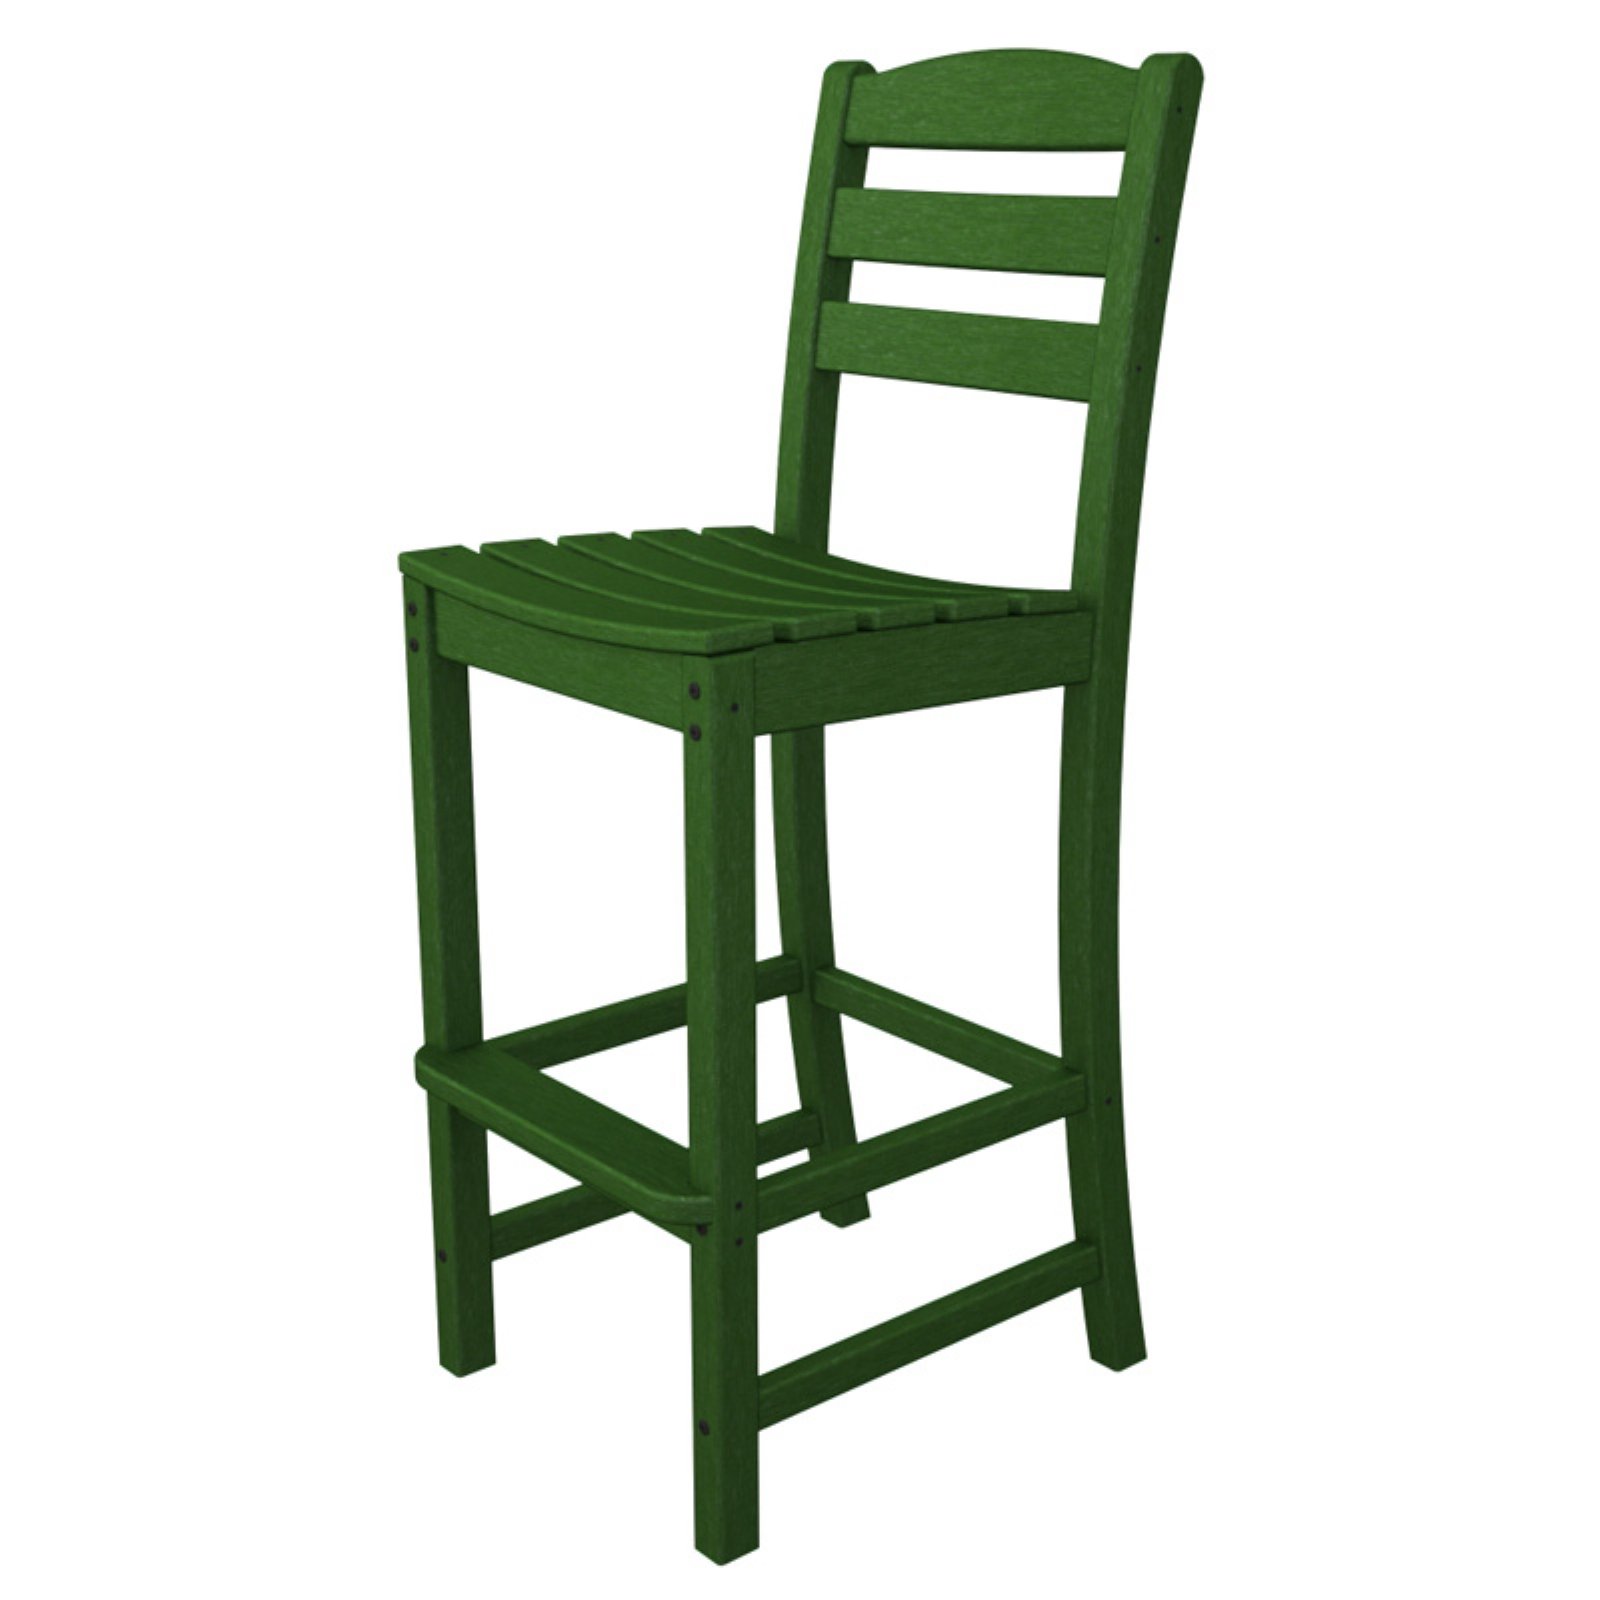 Polywood La Casa Cafe Outdoor Bar Chair in Green - image 1 of 4